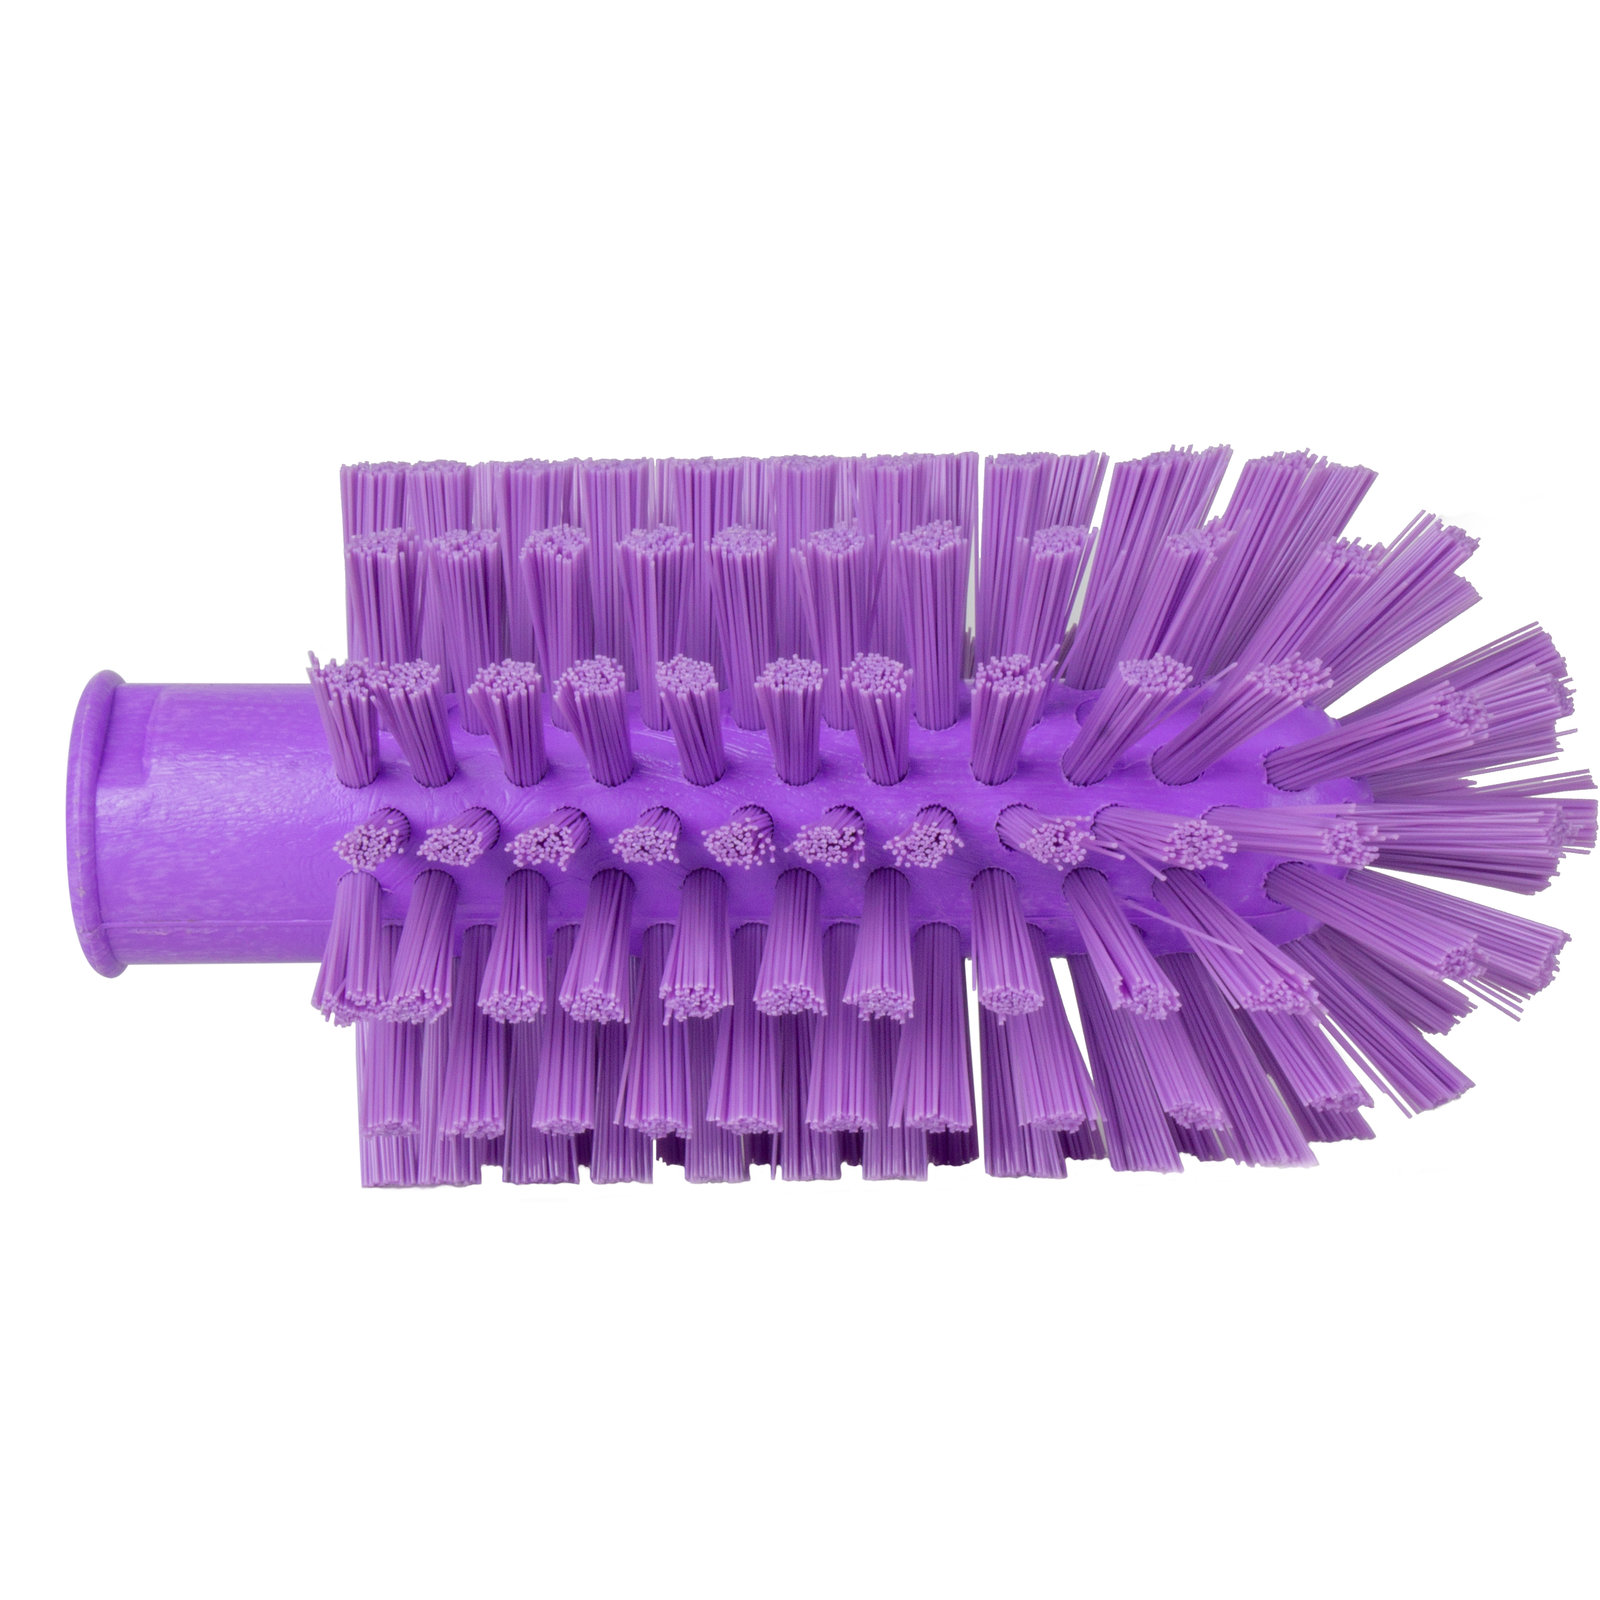 3 Drain Brush - Color Coded